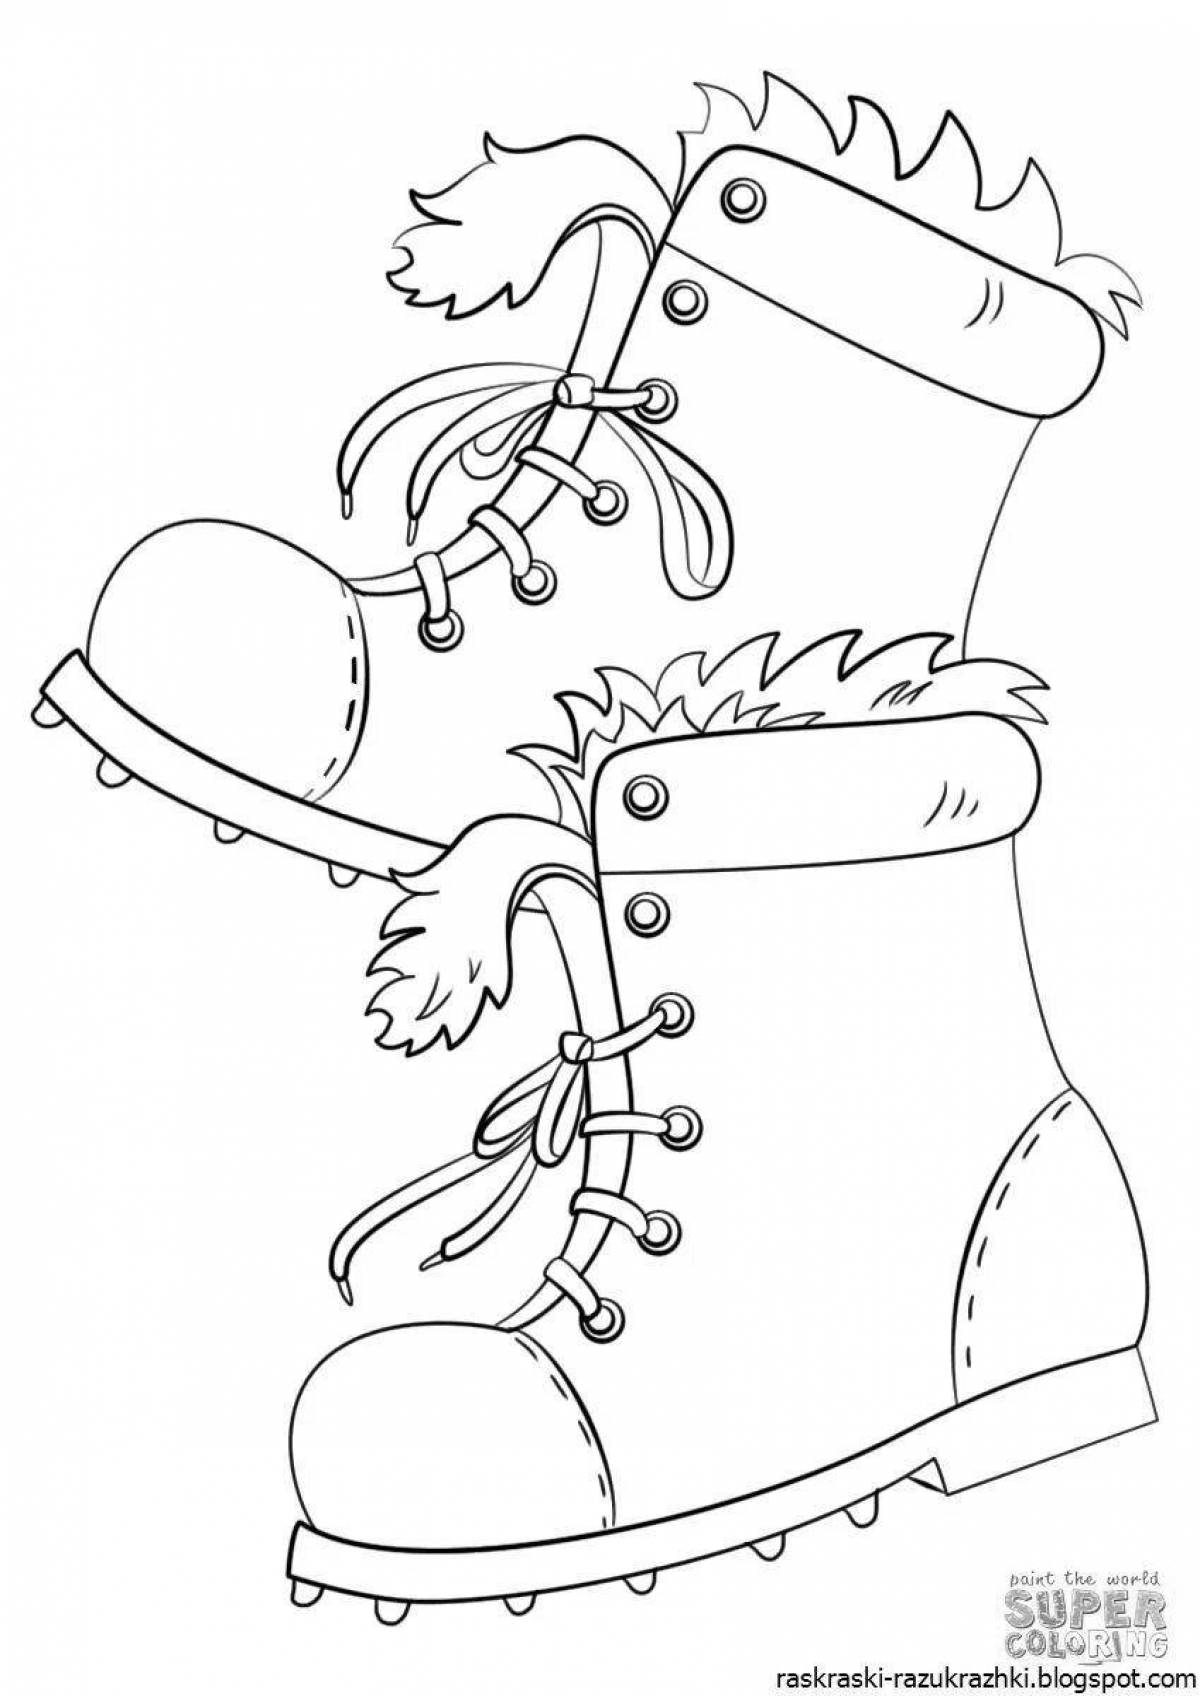 Cute toddler shoes coloring page